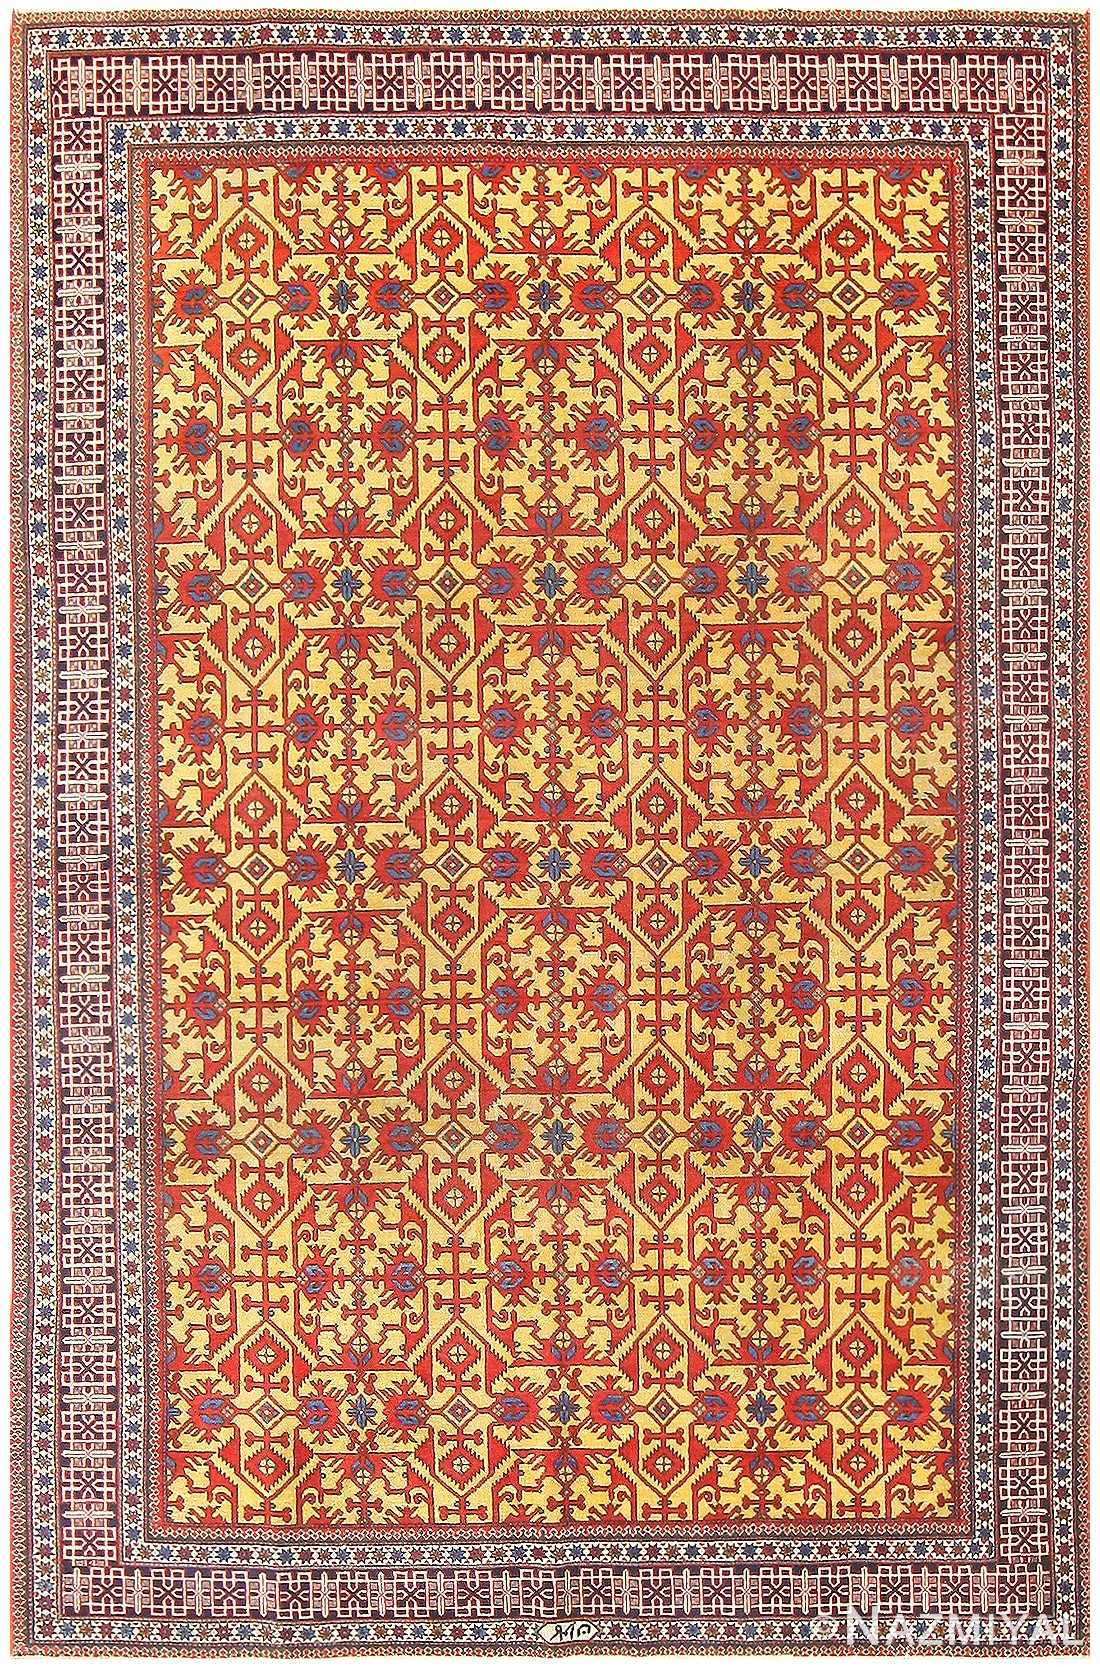 Gold Antique Persian Tabriz Lotto Design Rug #48248 by Nazmiyal Antique Rugs